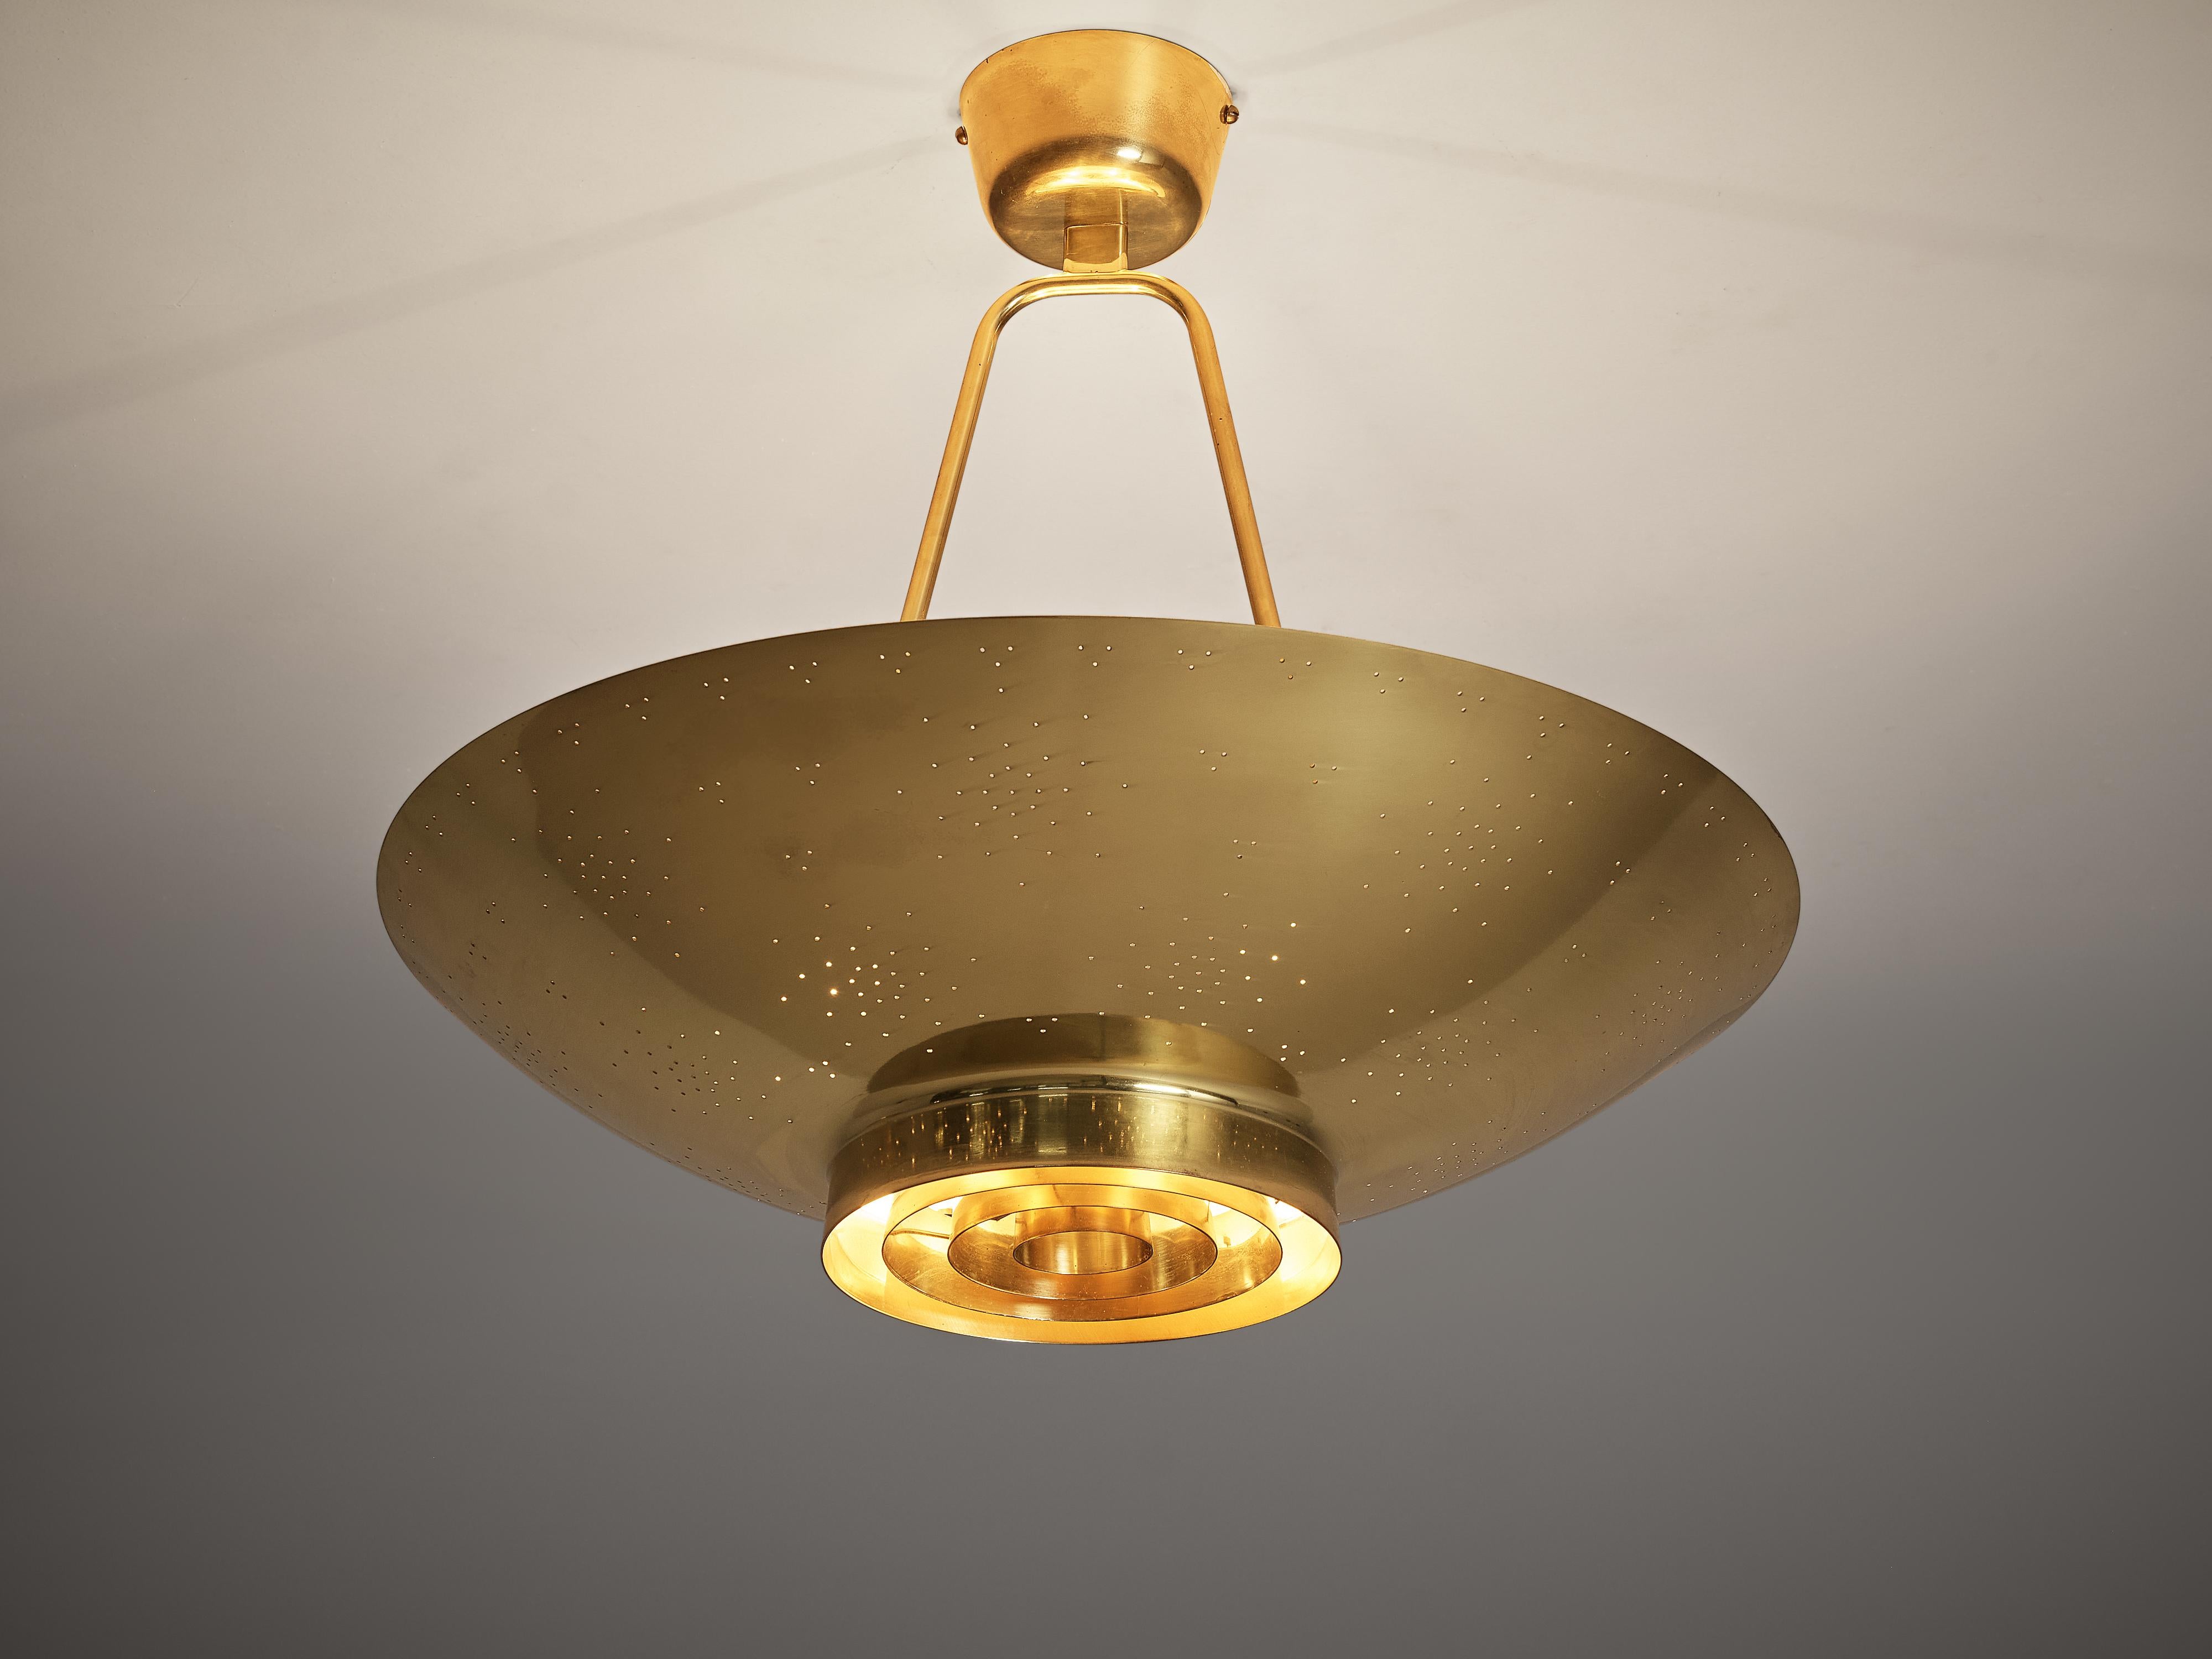 Paavo Tynell for Taito, pendant lamp model ‘9060’, brass, Finland, 1950/52

Finnish designer Paavo Tynell designed the lamp '9060' for the office of an important employee at the United Nations building in NYC. Typical for Tynell’s iconic light